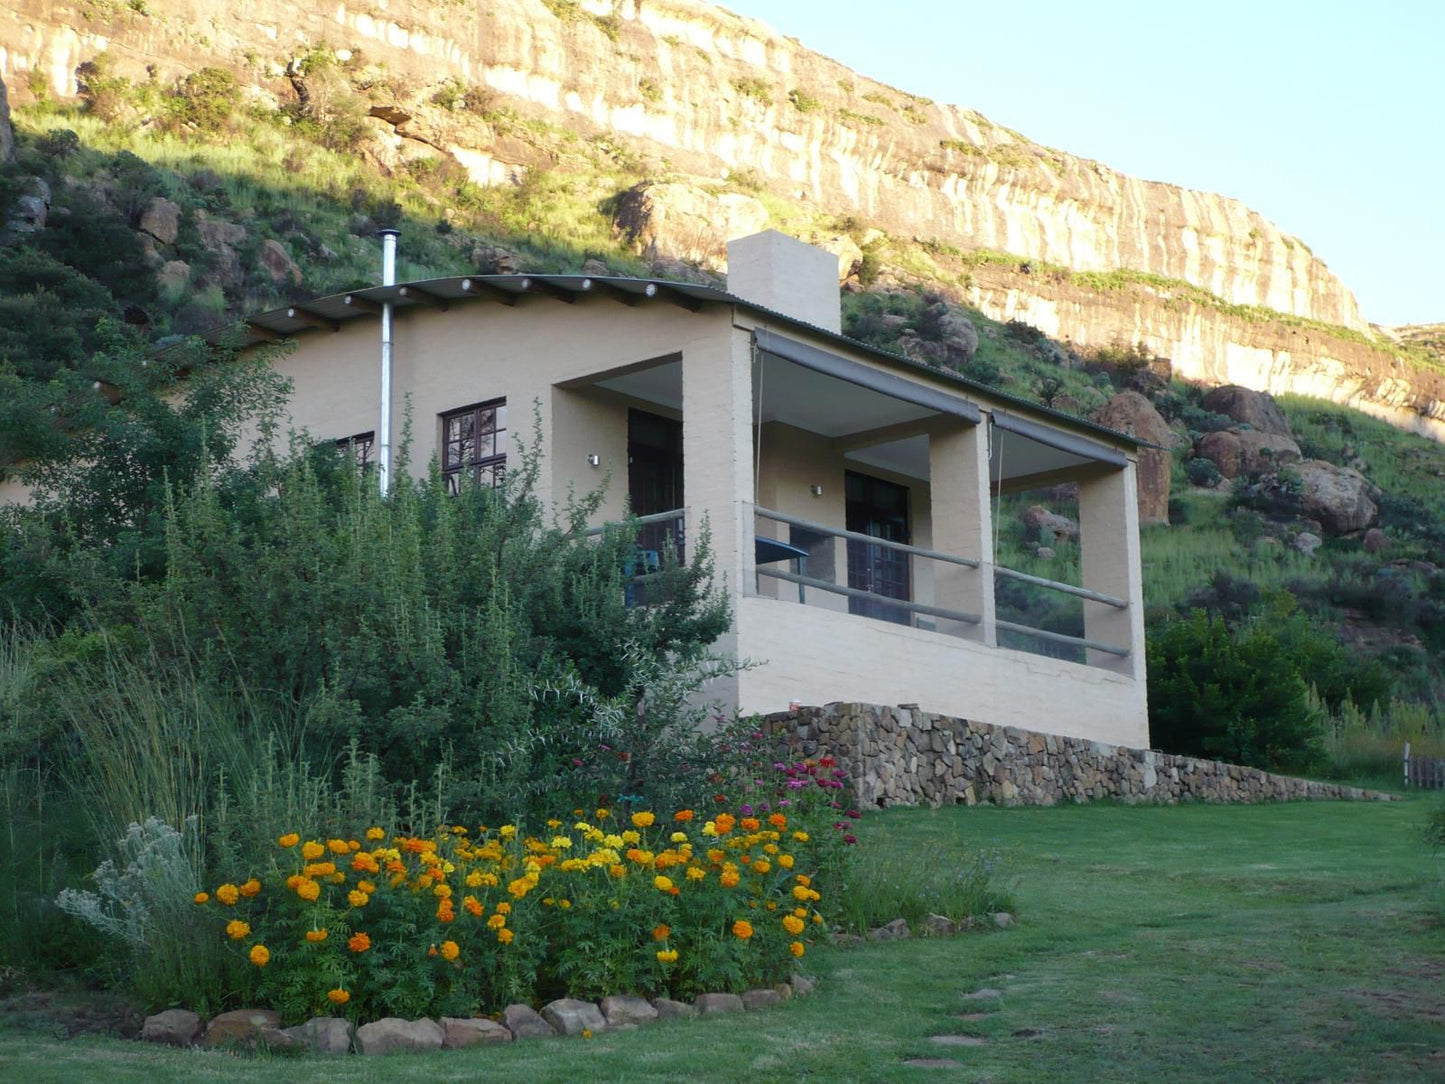 Mafube Mountain Retreat Fouriesburg Free State South Africa House, Building, Architecture